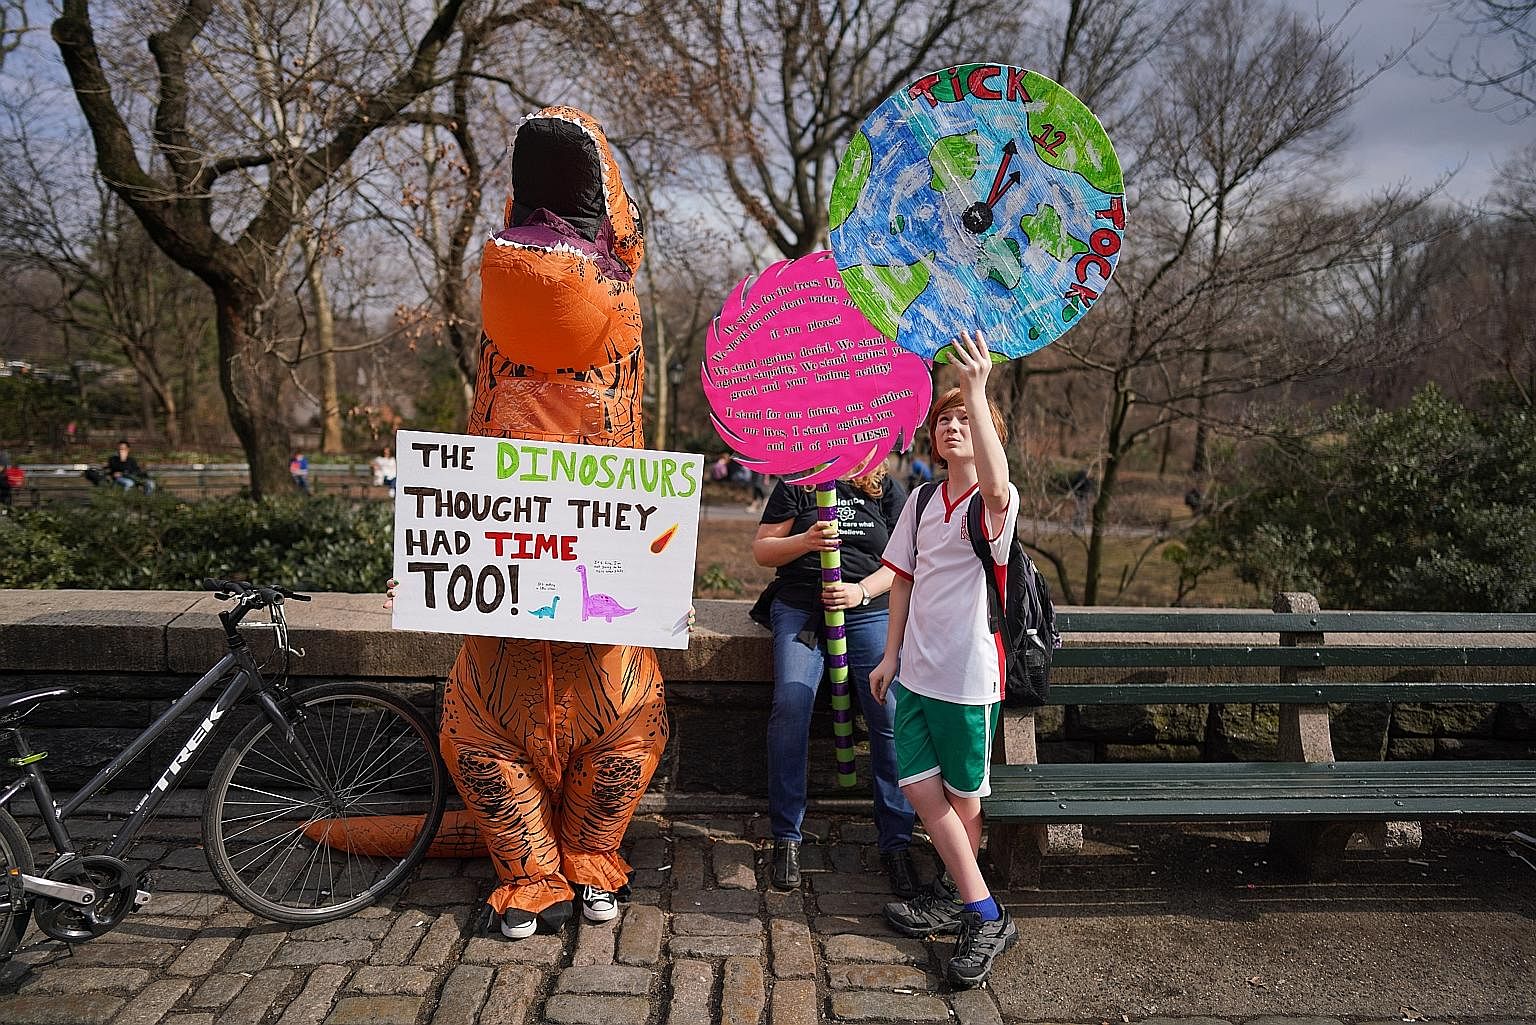 Schoolchildren in Hong Kong were among the million students across the globe who skipped school to demonstrate last Friday, calling for stronger action on climate change. "If we let climate change go on, we won't have a future," says Luna Uribe (left